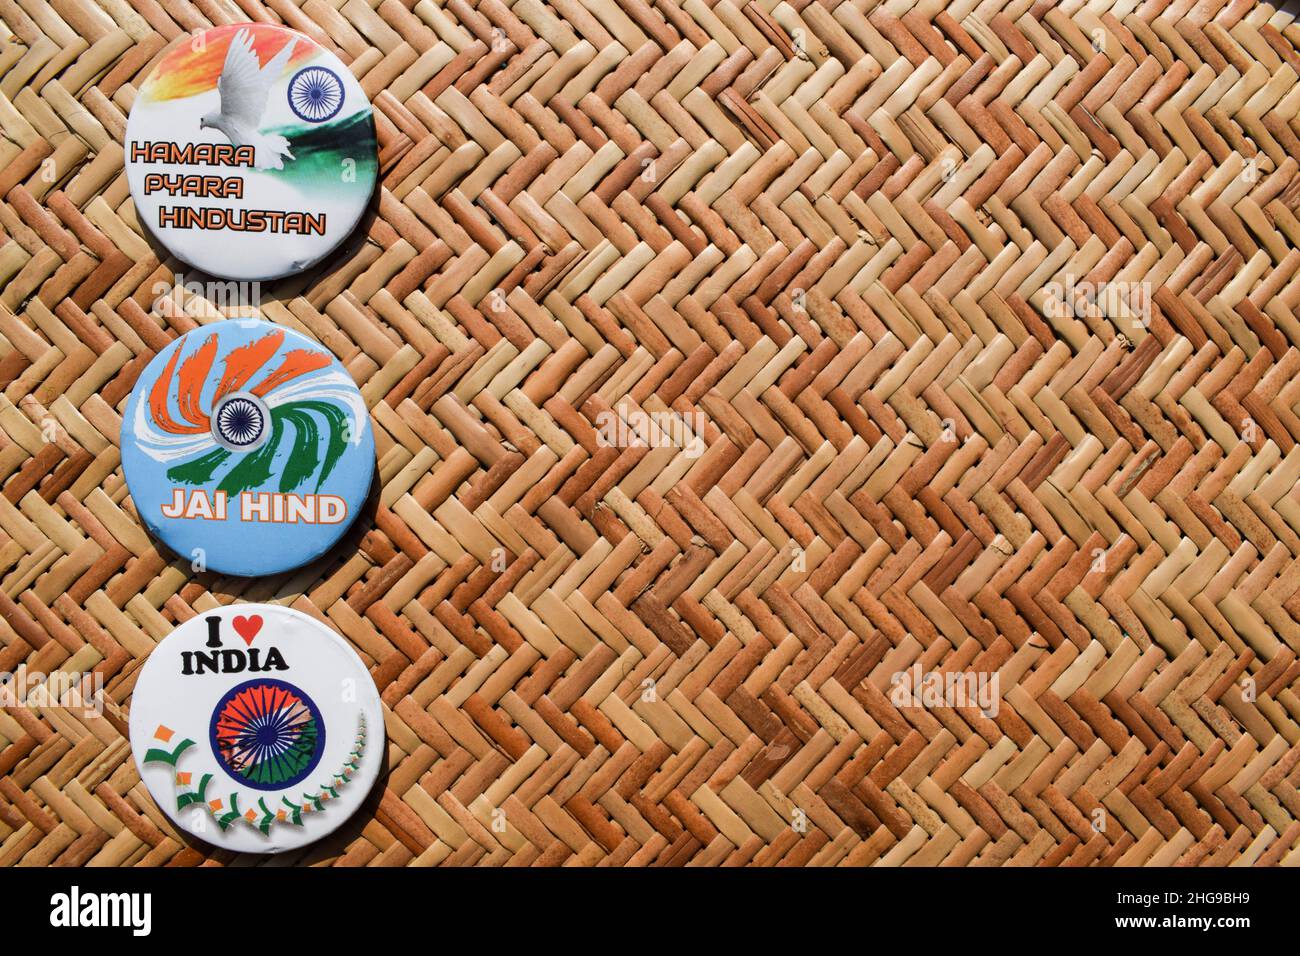 Indian Tricolour Badge pin written meaning ' Our lovely India' and Jai Hindi meaning hail India. Blank space to write text fonts posters theme Stock Photo